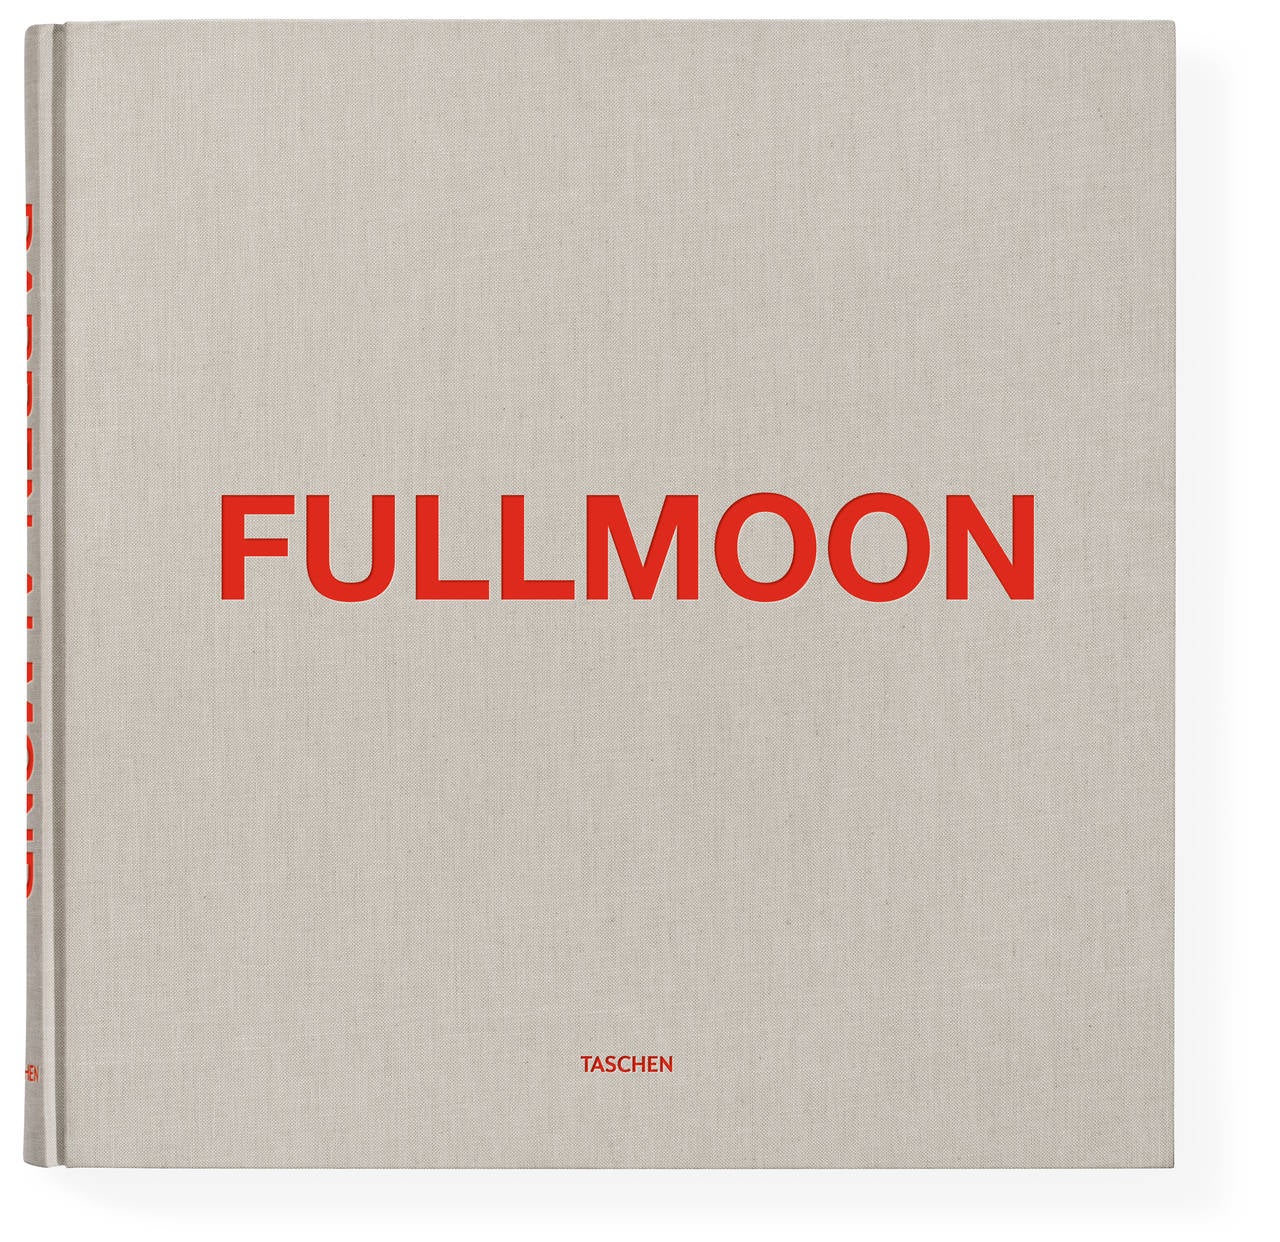 Lunar lens.

Darren Almond’s nocturnal nature series.

This Art edition of 60 numbered copies (No.1-60), each signed by Darren Almond, comes with a signed C-print Moonbow@Fullmoon (2011), photographed from the Brazilian side of the Iguazu Fall